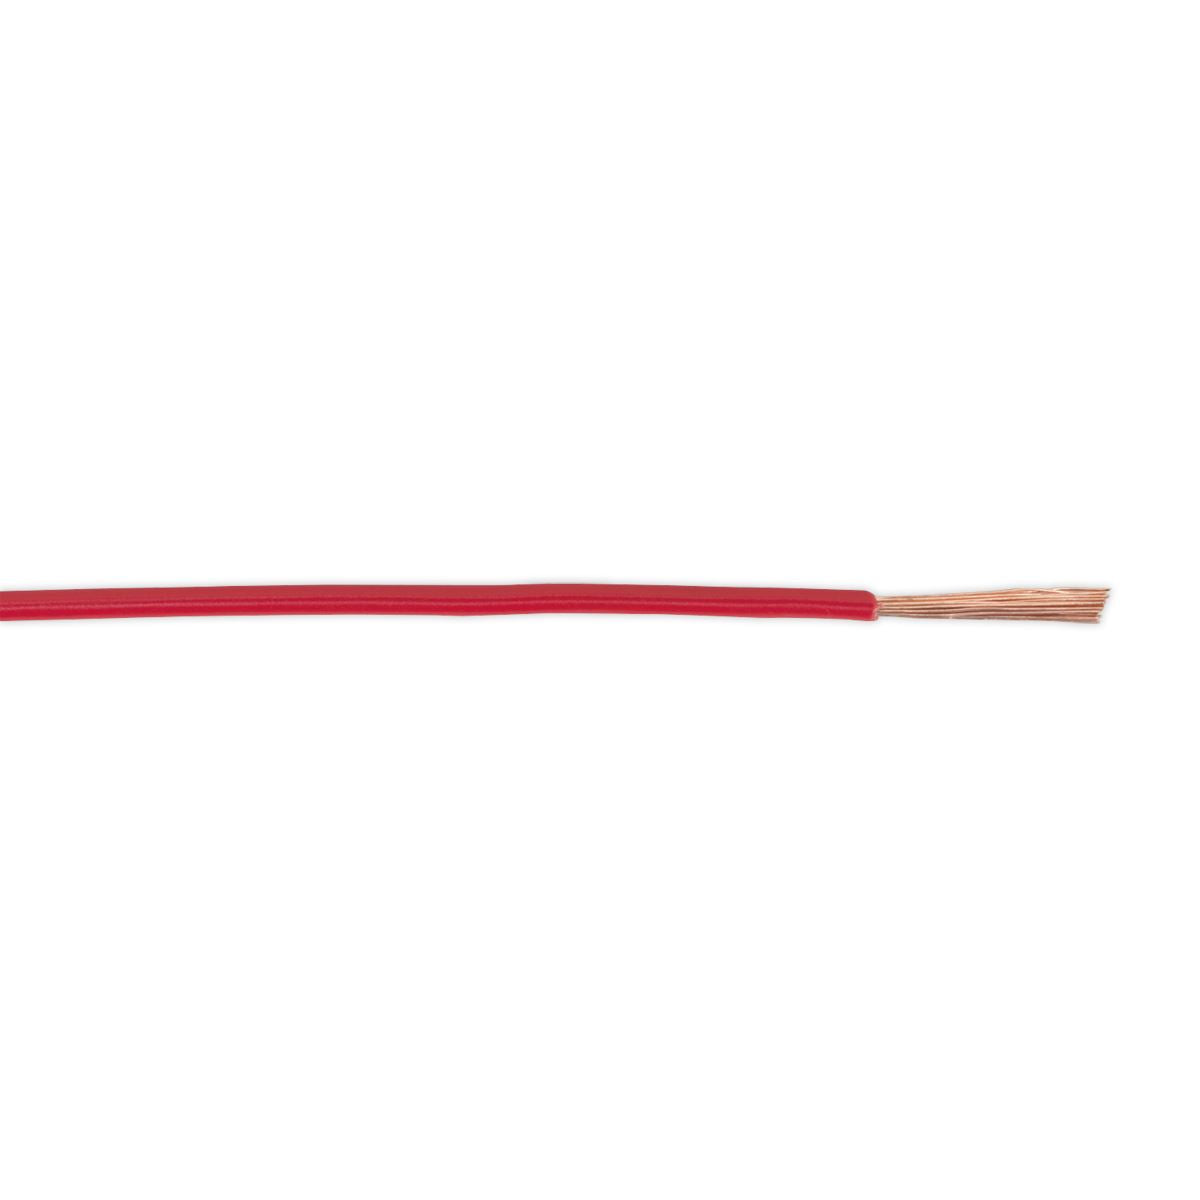 Sealey Automotive Cable Thin Wall Single 1mm² 32/0.20mm 50m Red